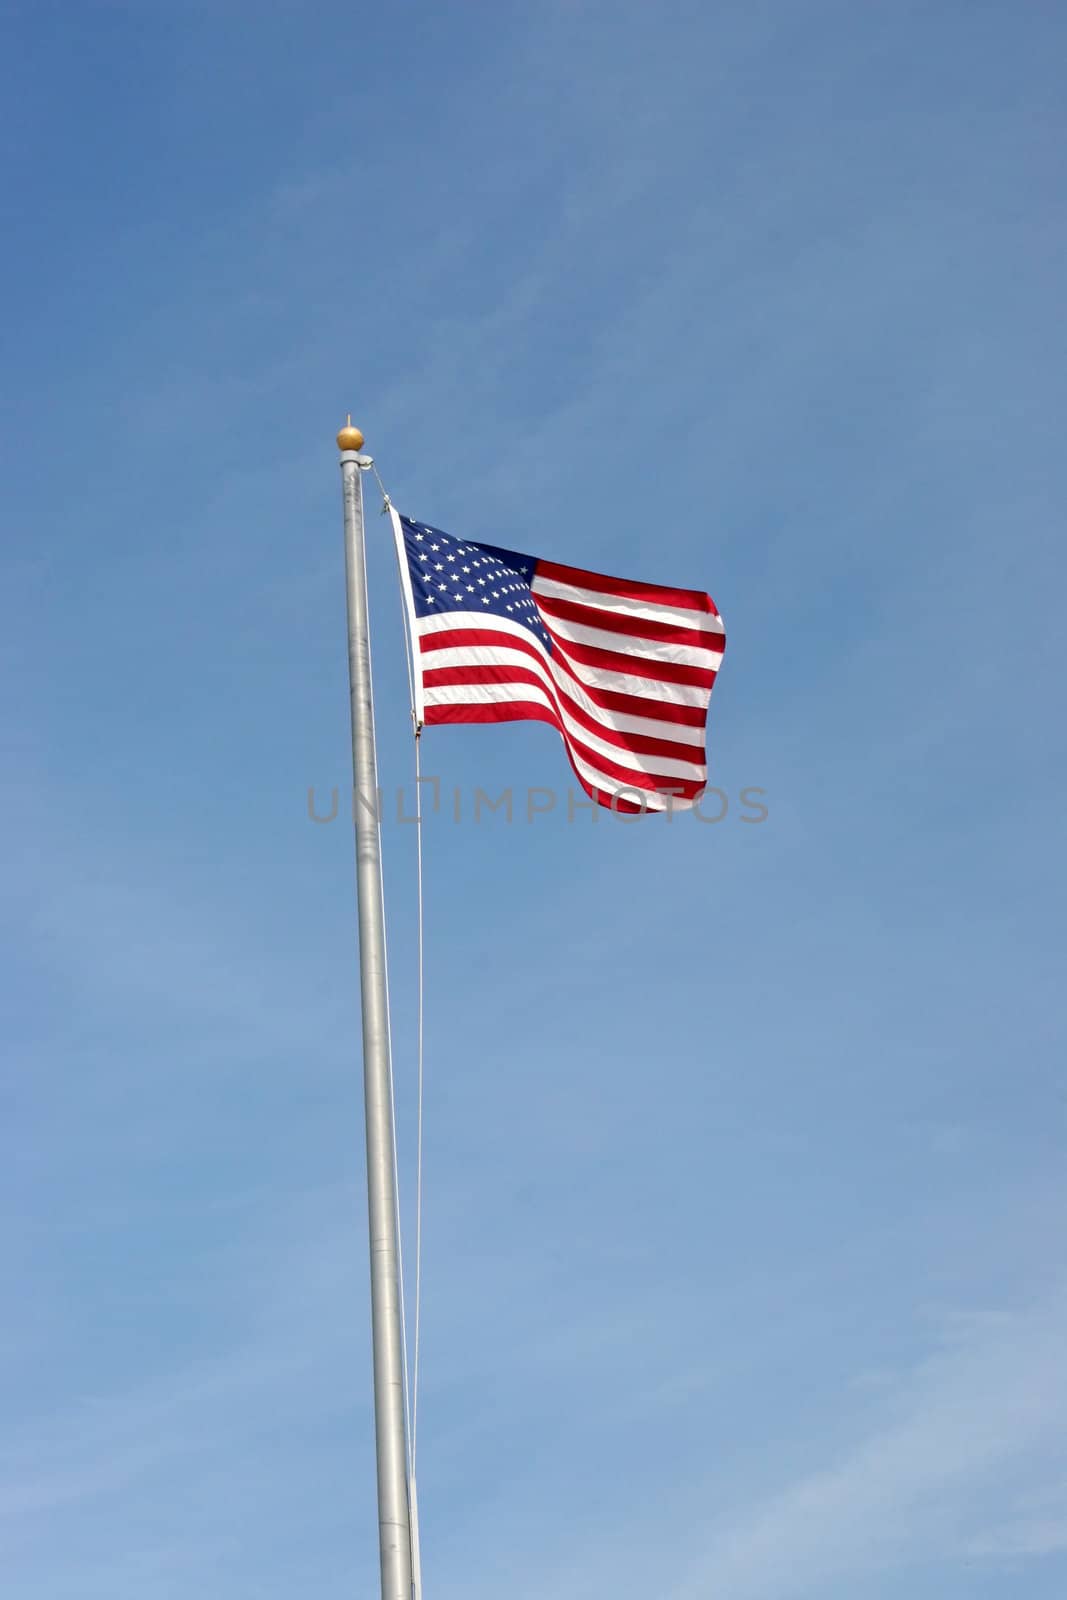 An American Flag flying in the air up a pole